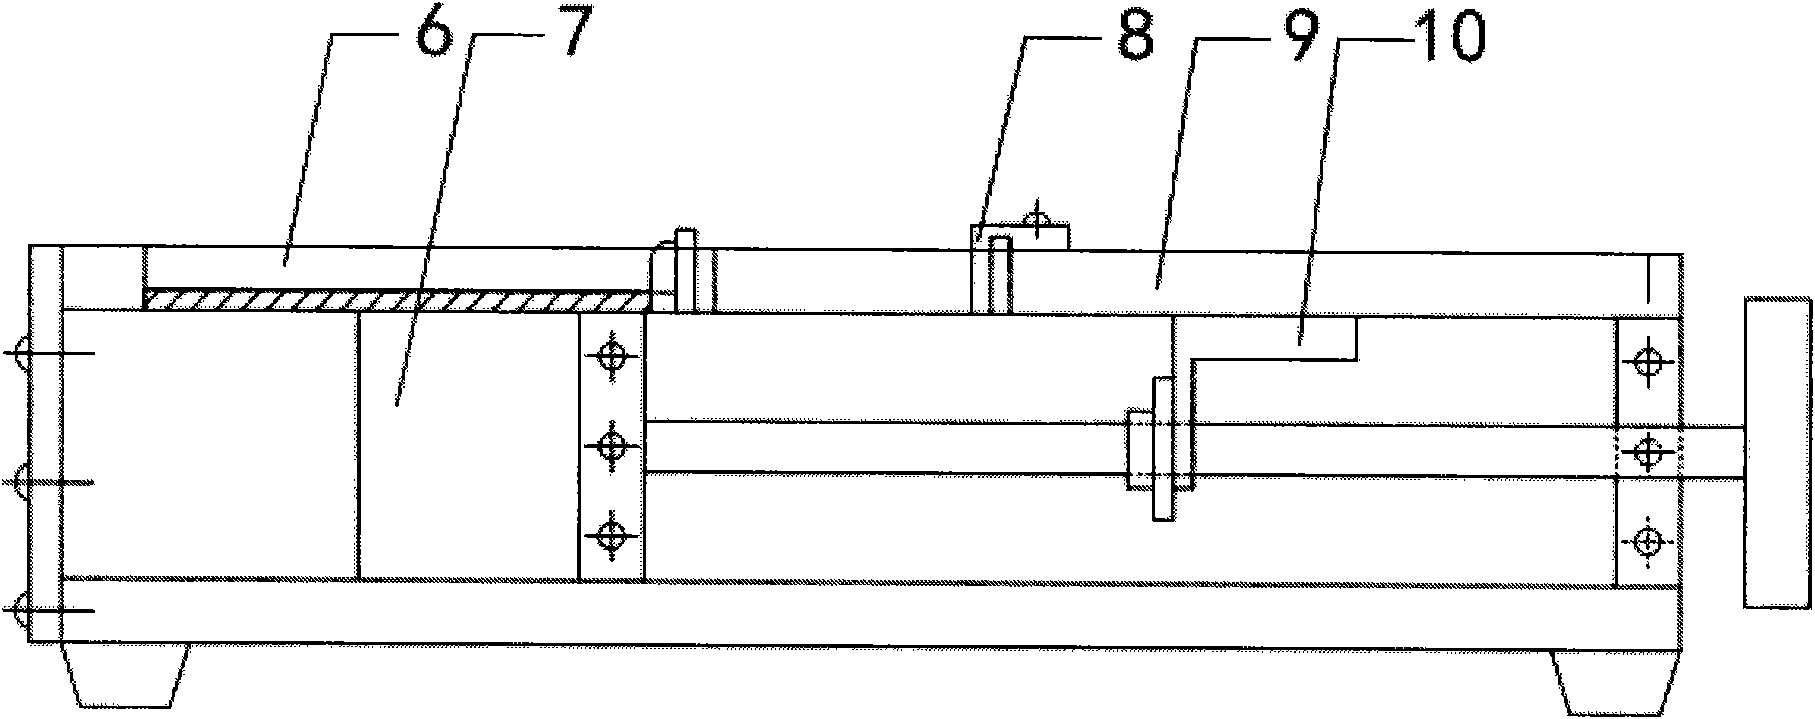 Device for applying oscillatory constant fluid shearing force to anchorage-dependent cells